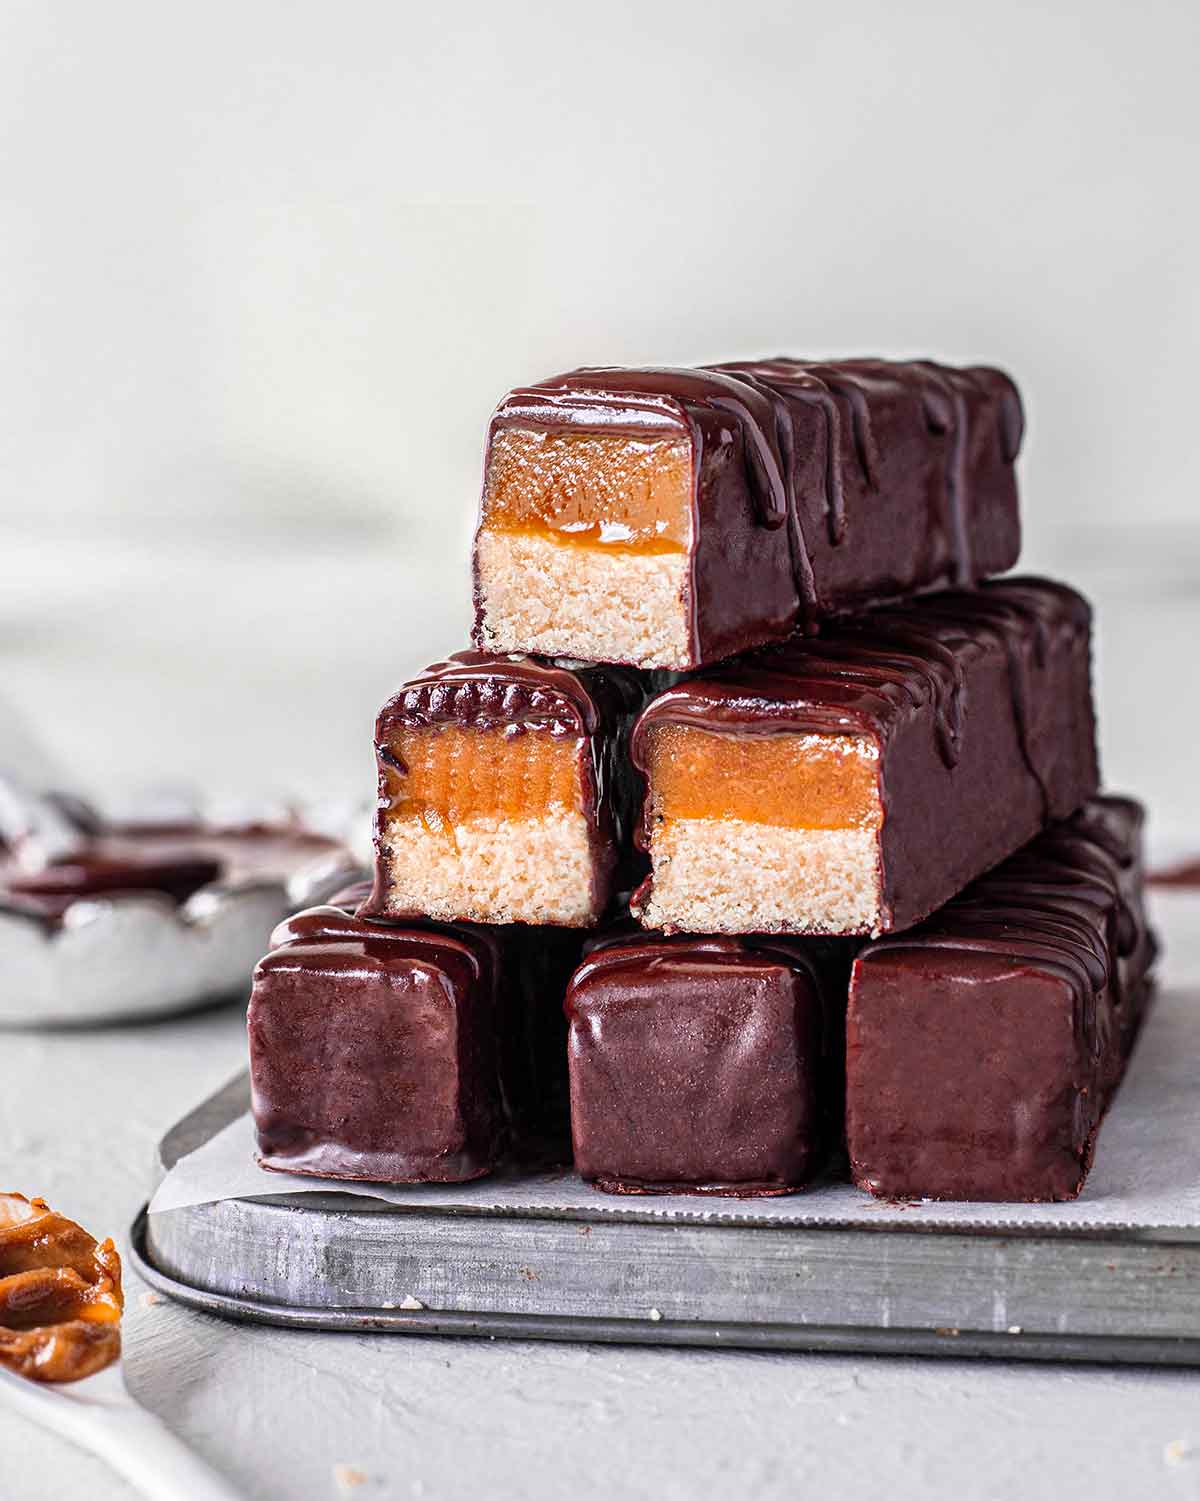 Chocolate caramel bars stacked on a silver tray.